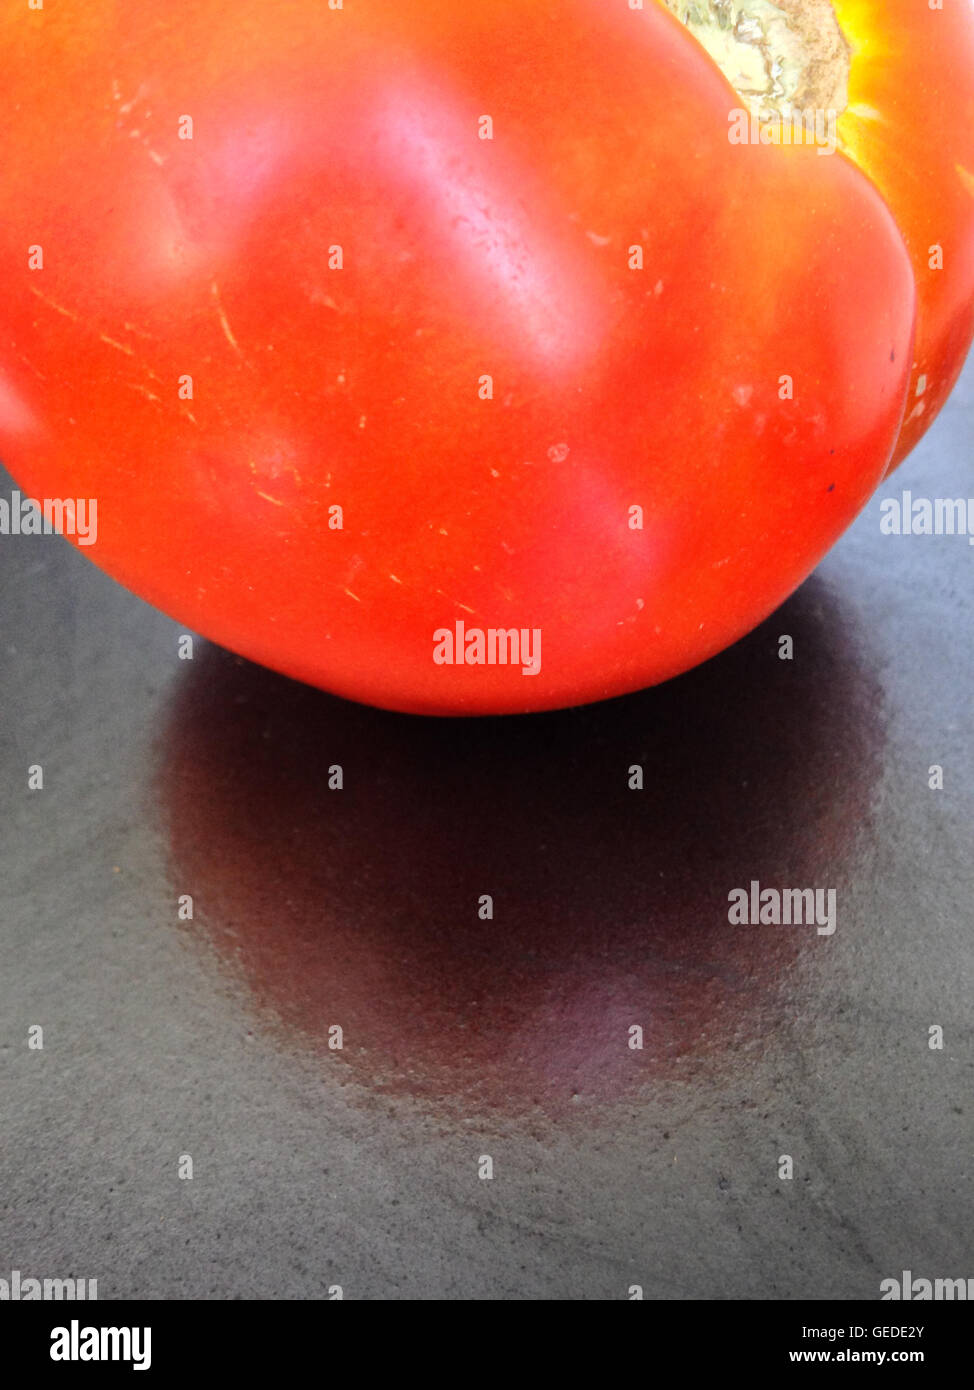 Red tomato on gray textured background Stock Photo